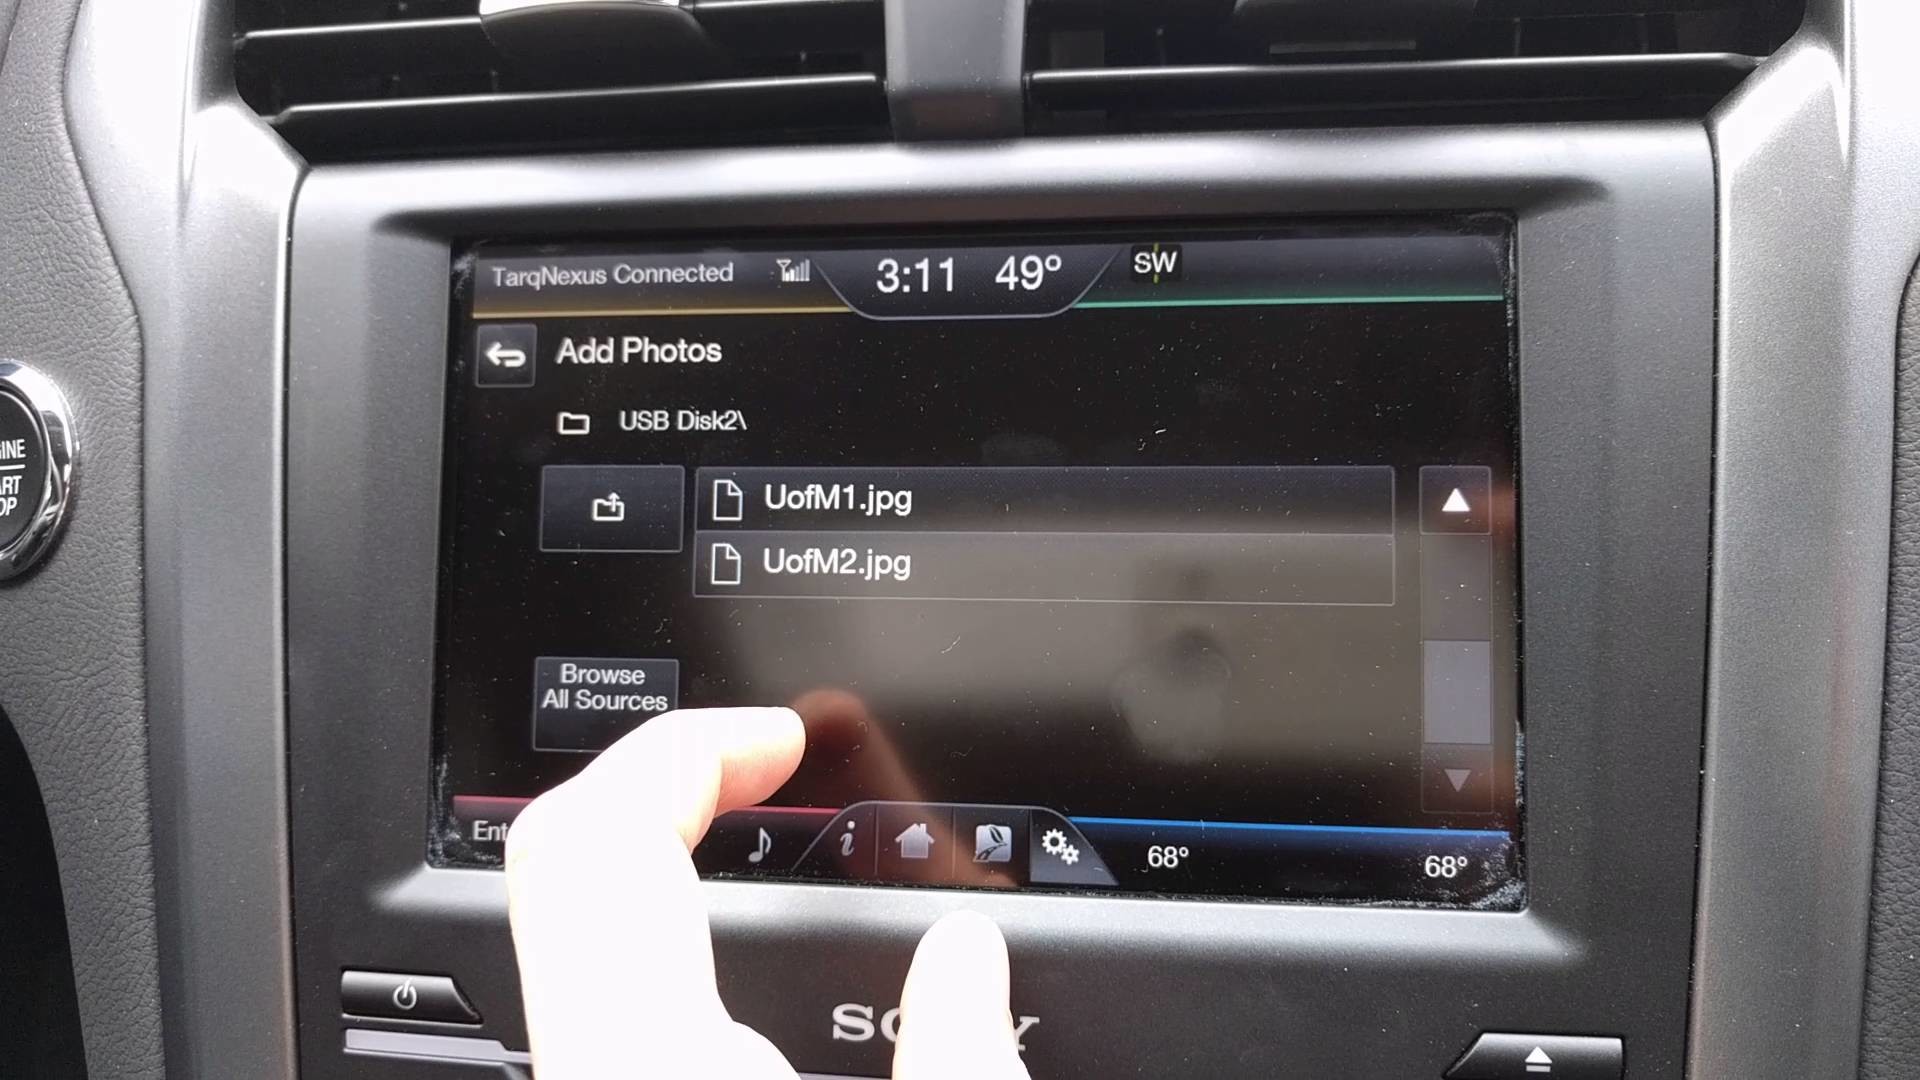 How To Add Wallpaper To Ford Sync From Iphone - Easy Connected Sync 2 , HD Wallpaper & Backgrounds